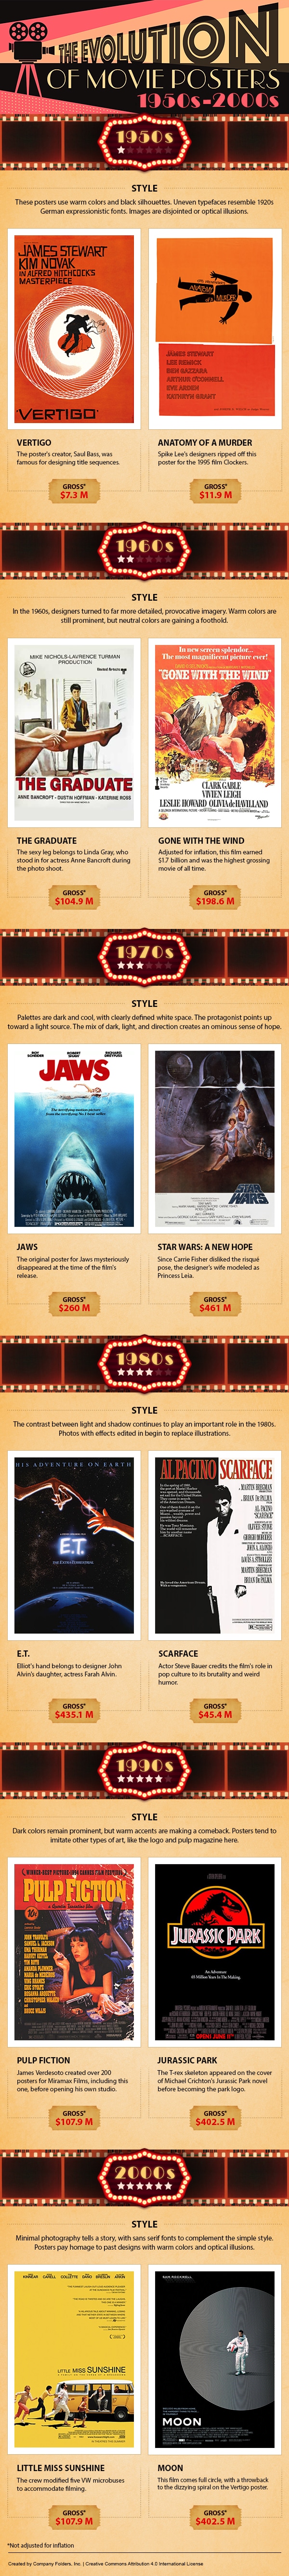 7 Decades Of Movie Poster Artistry – Amazing Inspiration [Infographic]